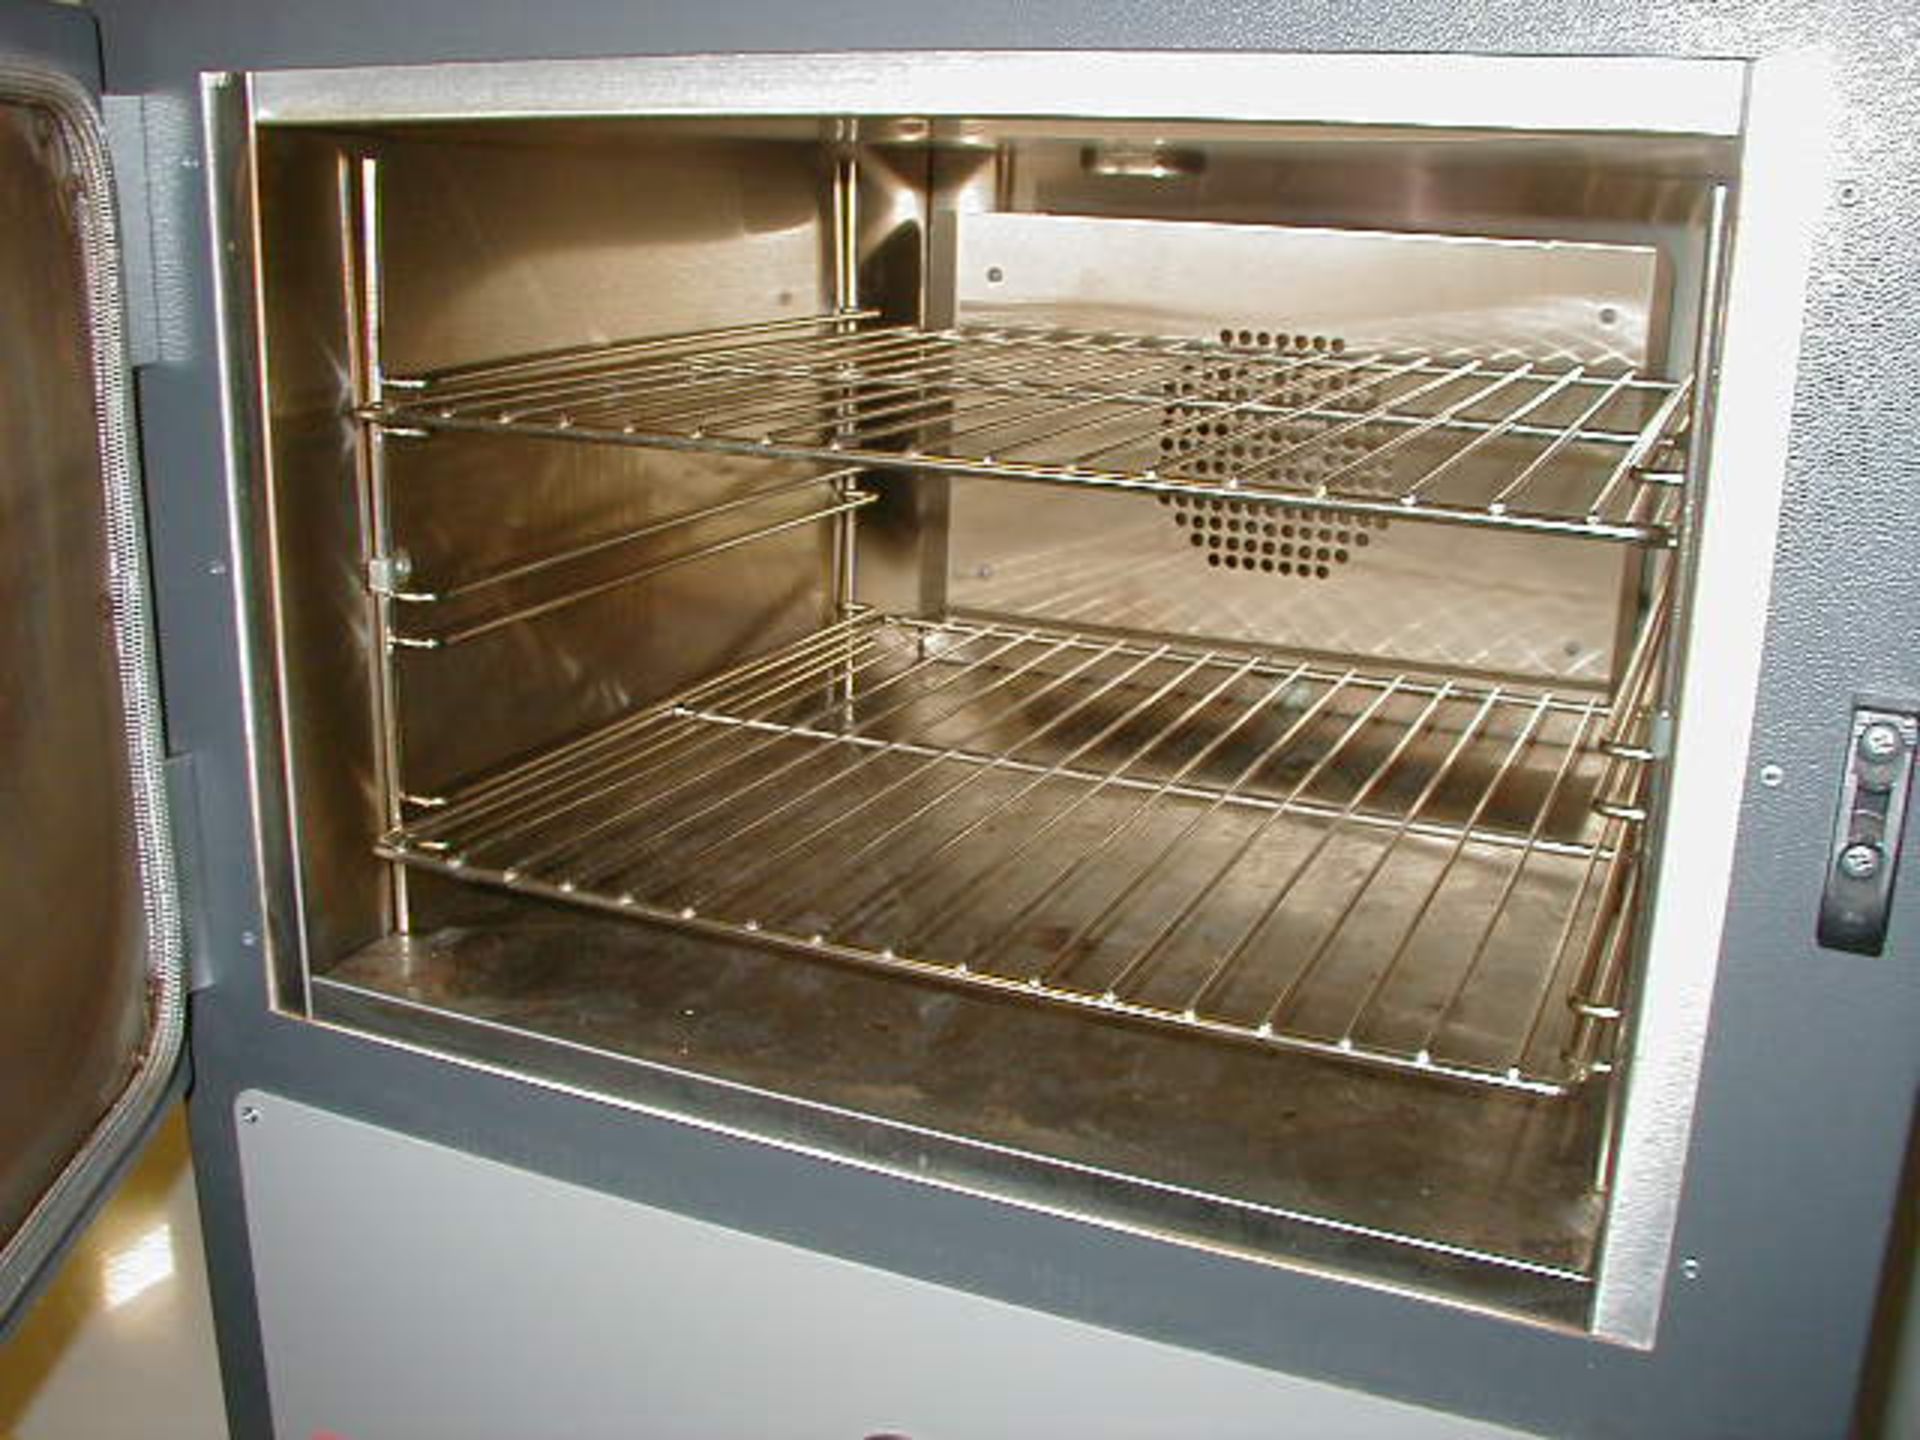 Pickstone Drying Oven - Image 3 of 3